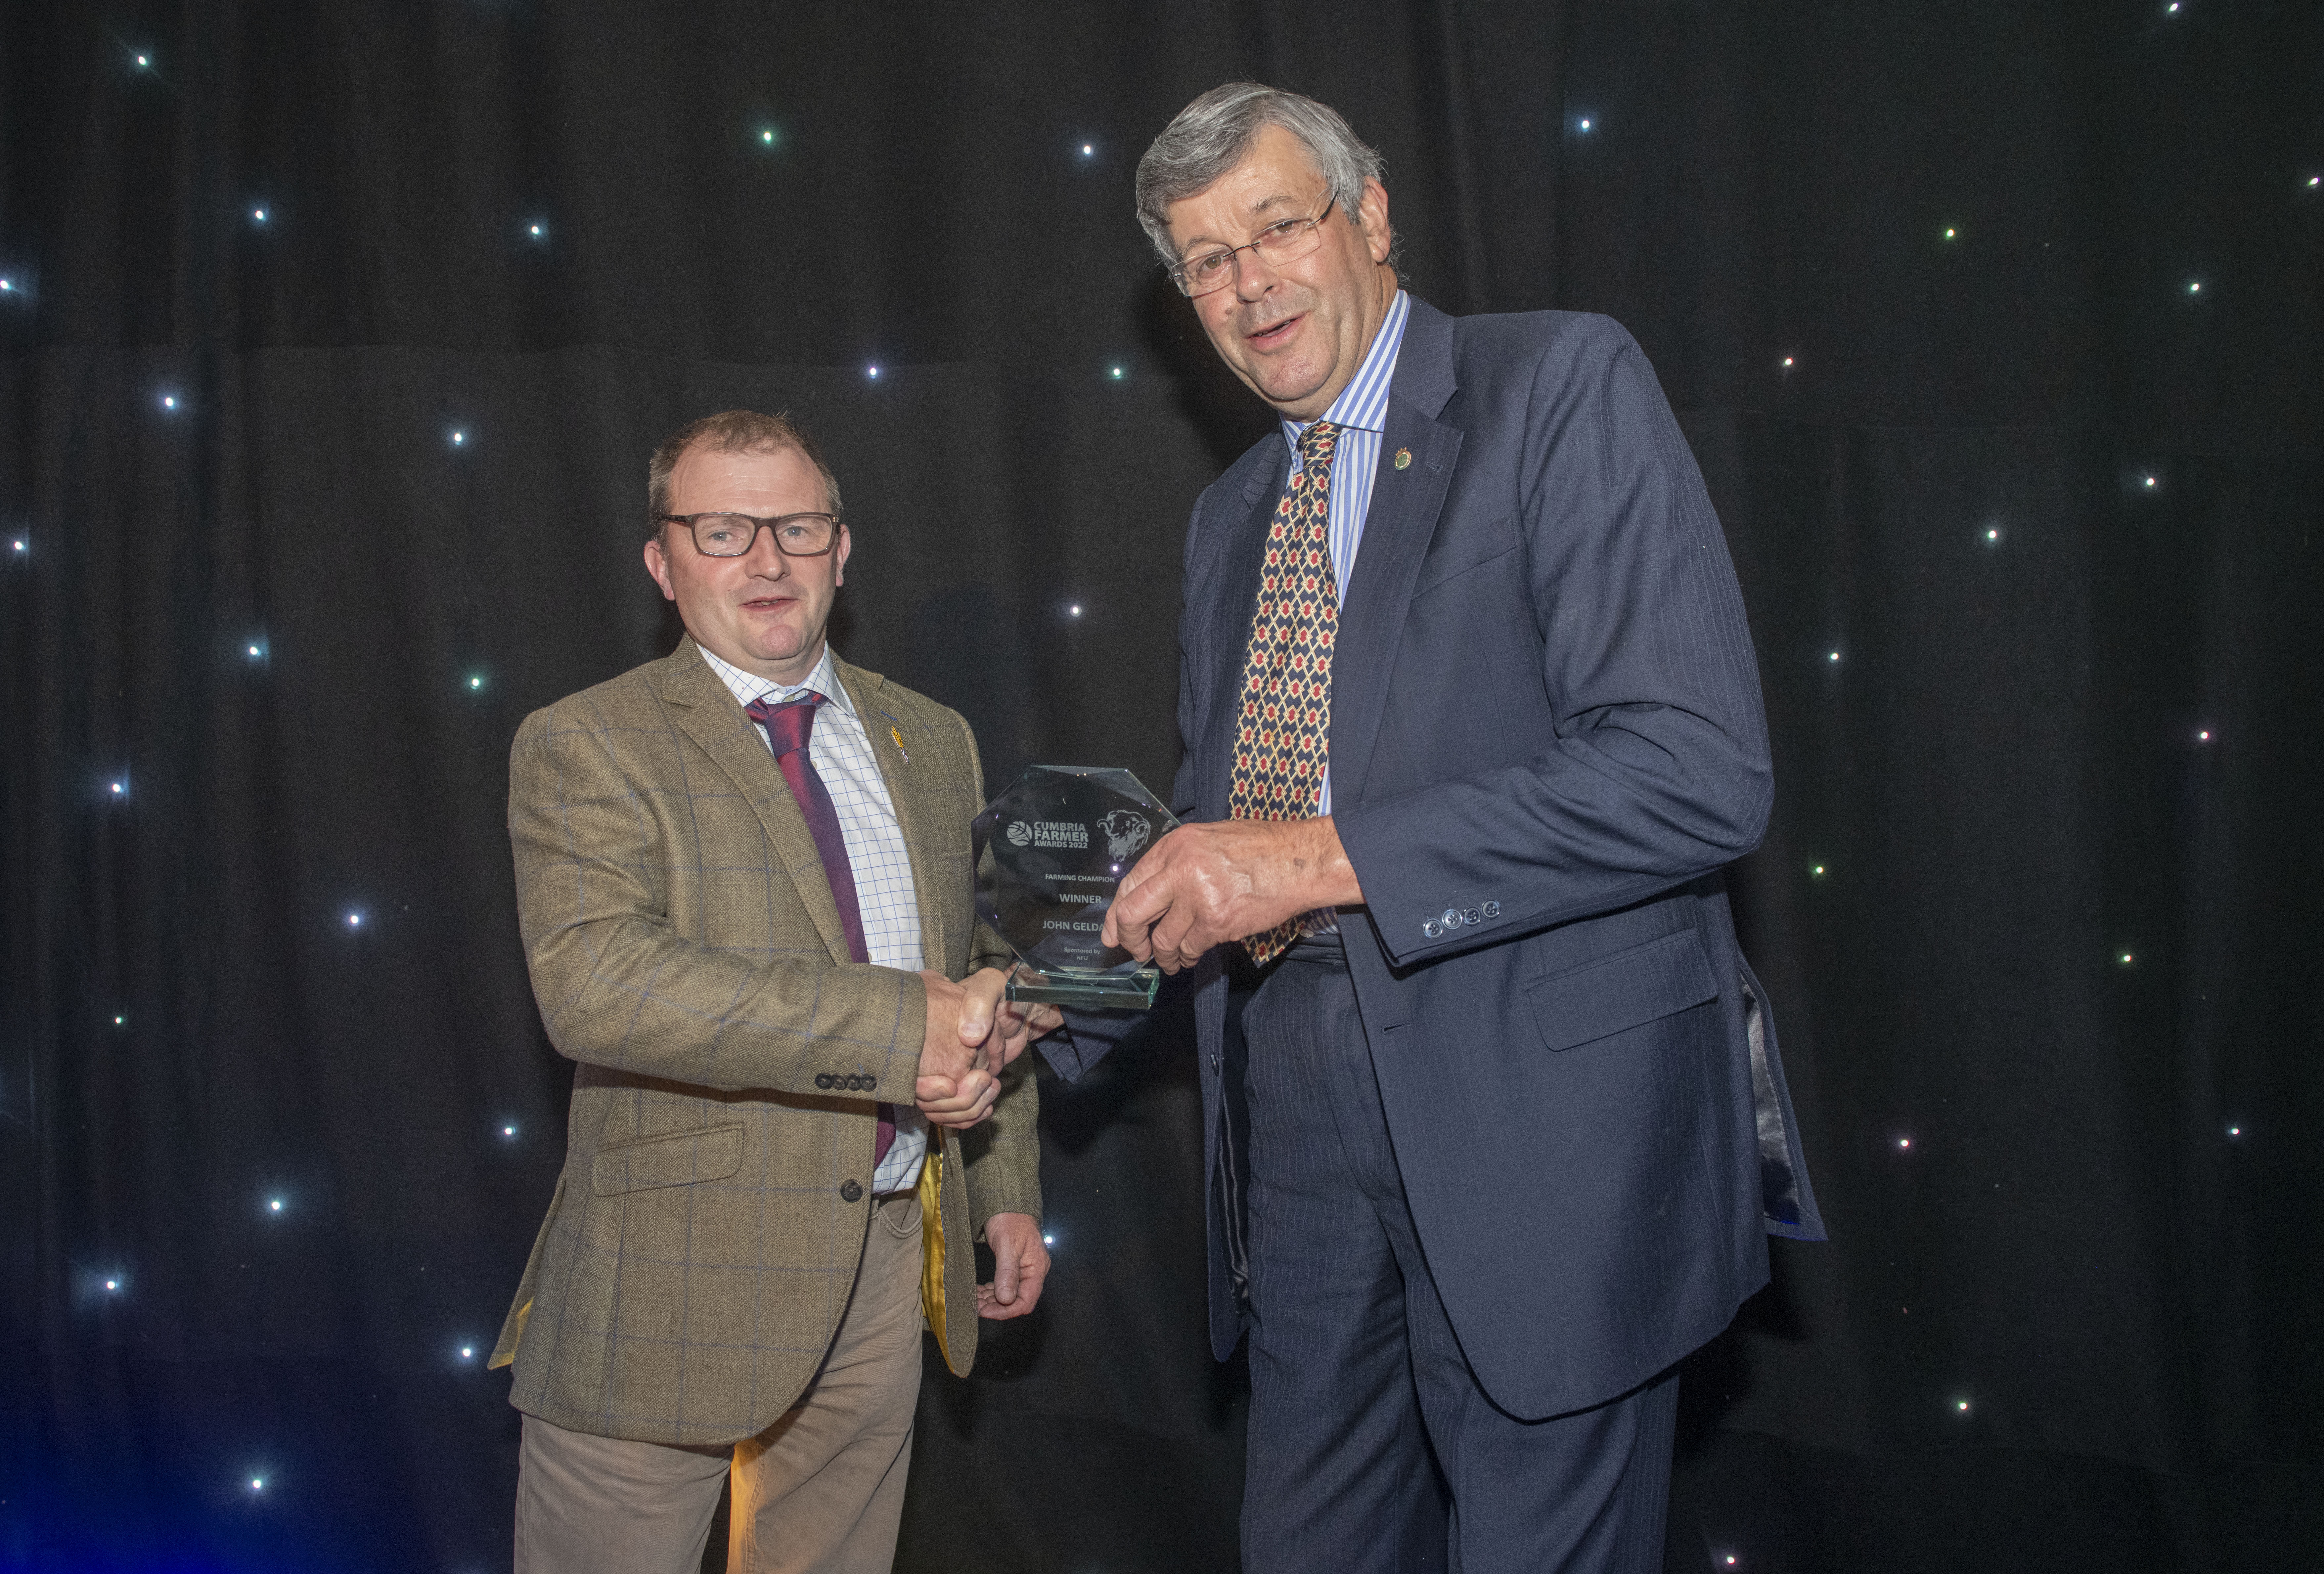 NFU Cumbria County Chairman Ian Bowness presents John Geldard with his Farming Champion Award with his